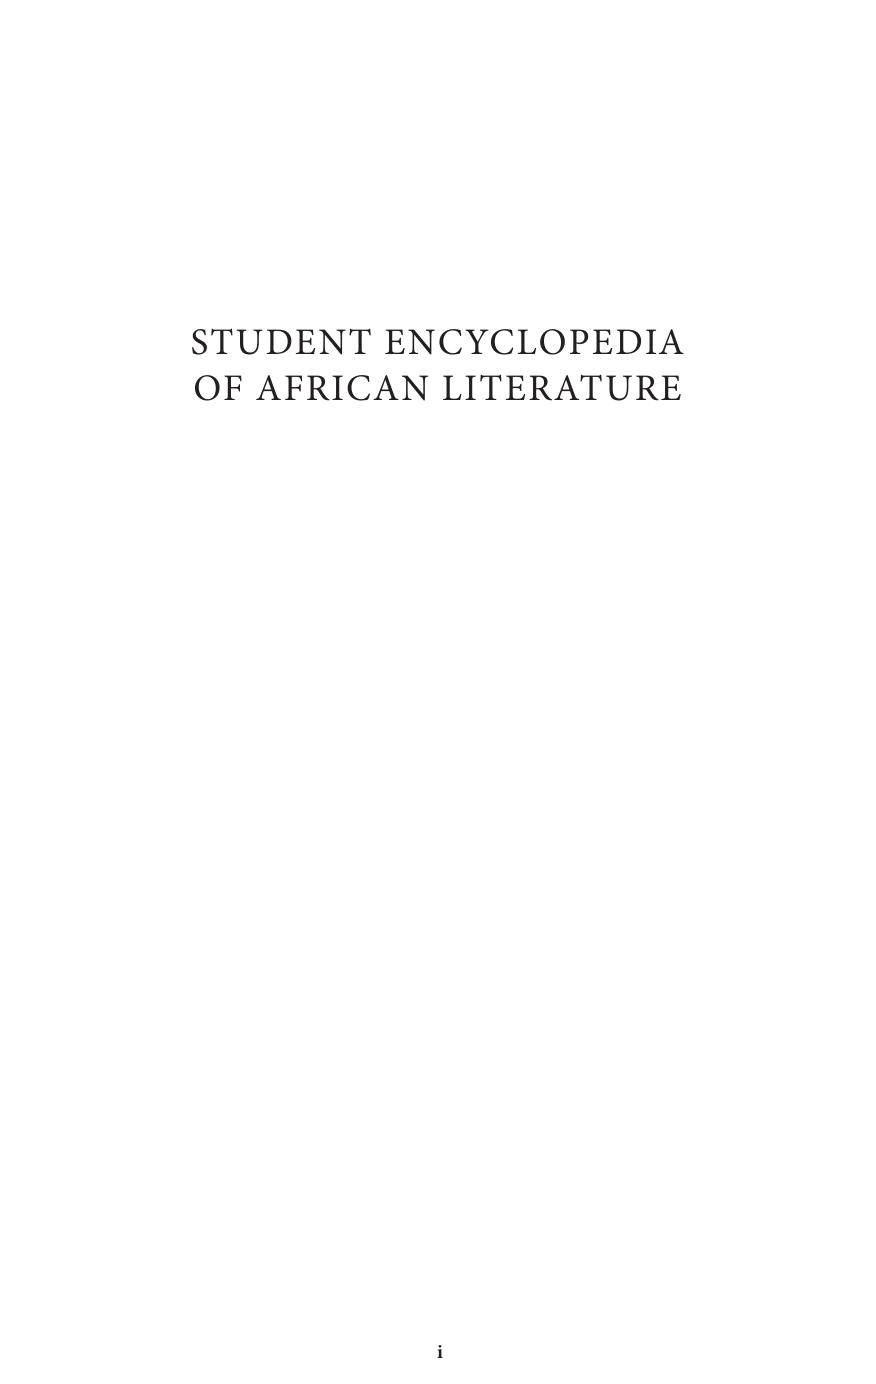 Student Encyclopedia of African Literature 2008